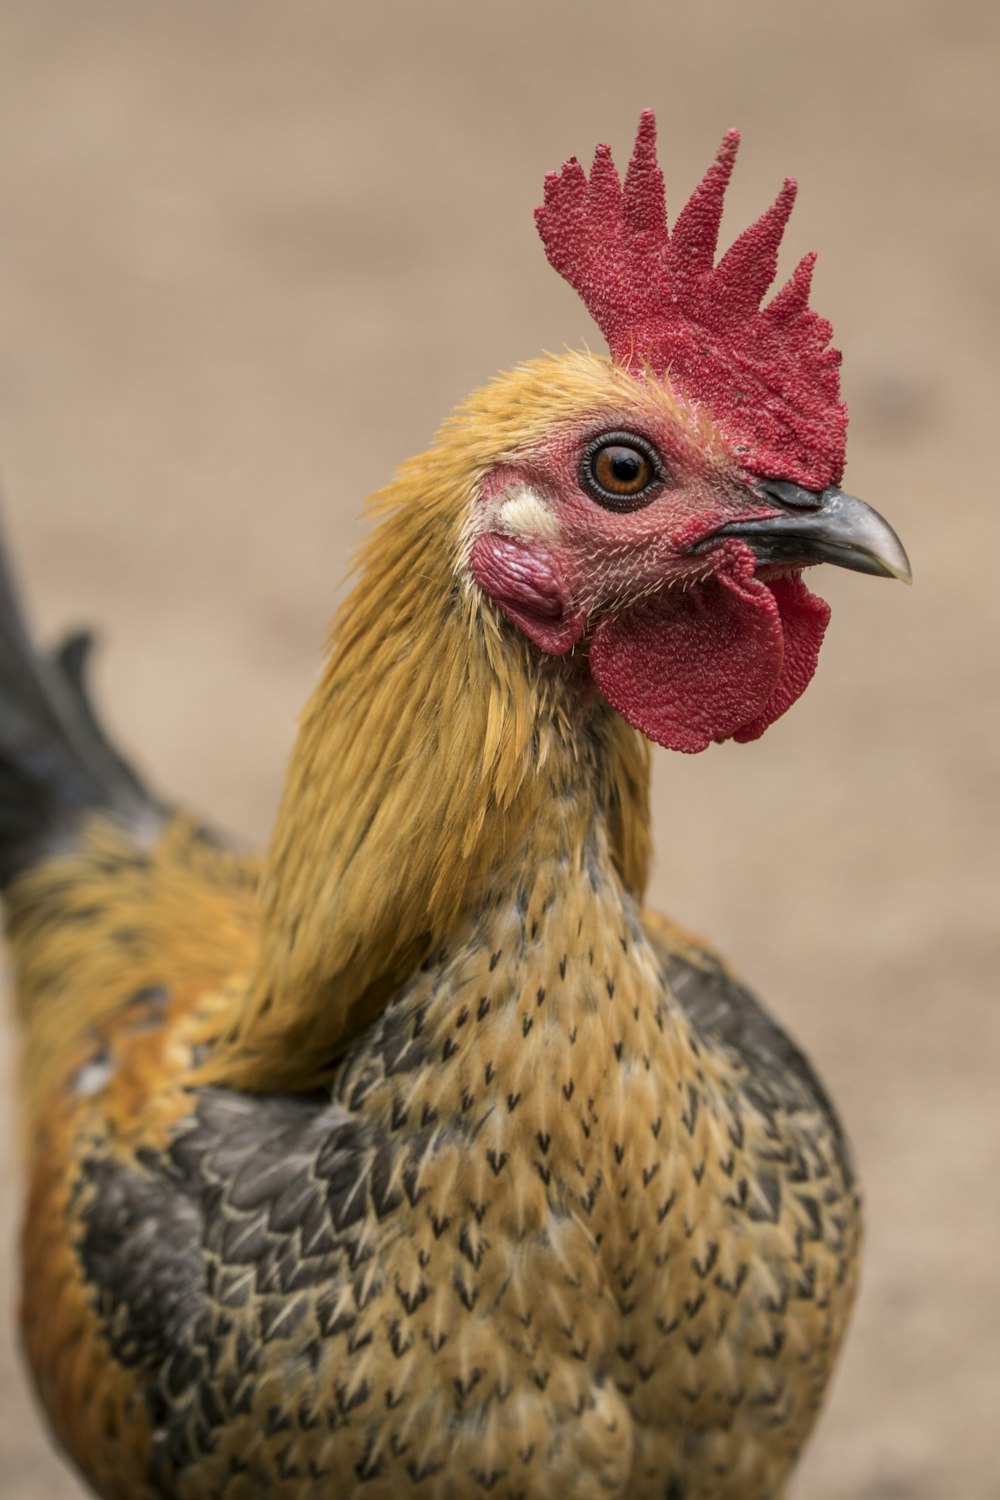 a close up of a rooster on a dirt ground